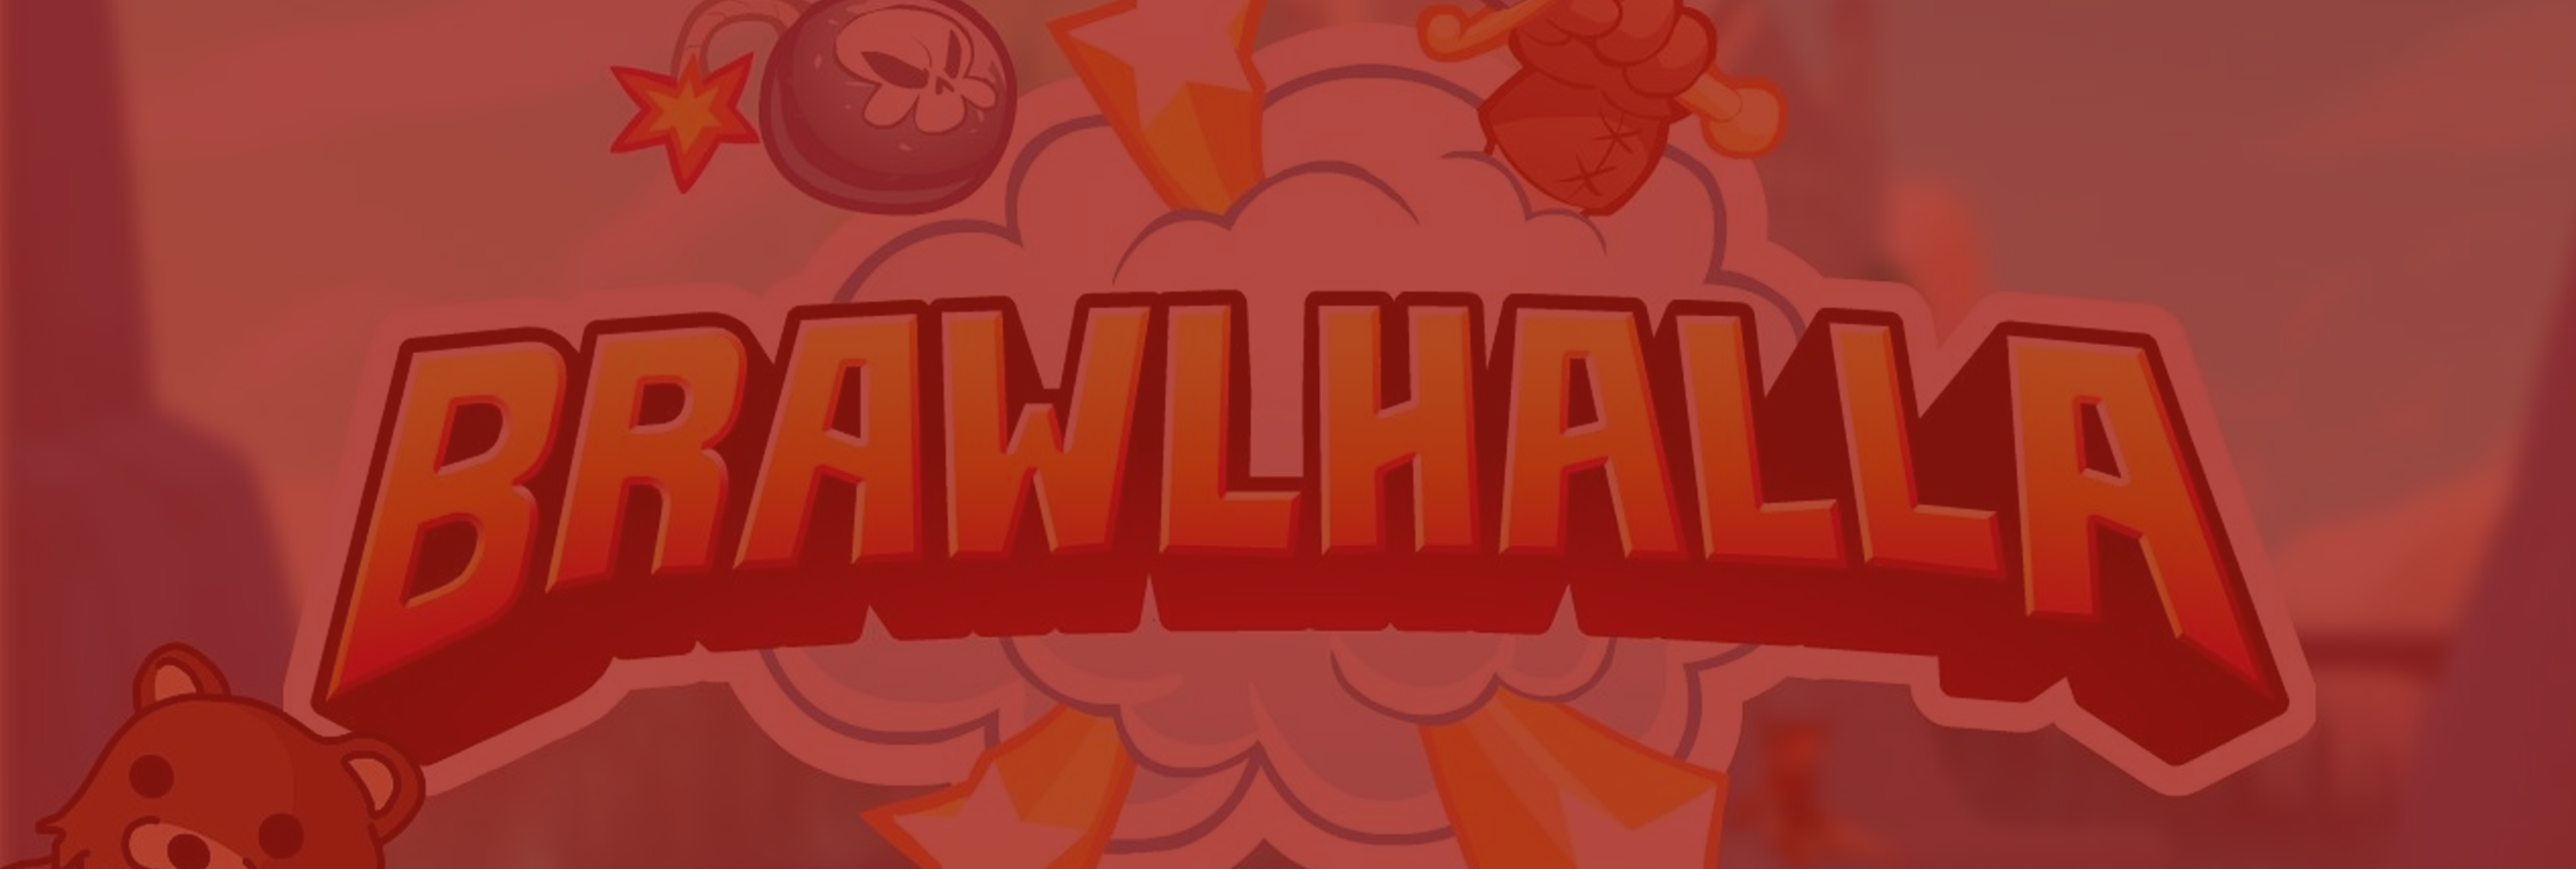 Brawlhalla is our favorite PC game on Steam right now